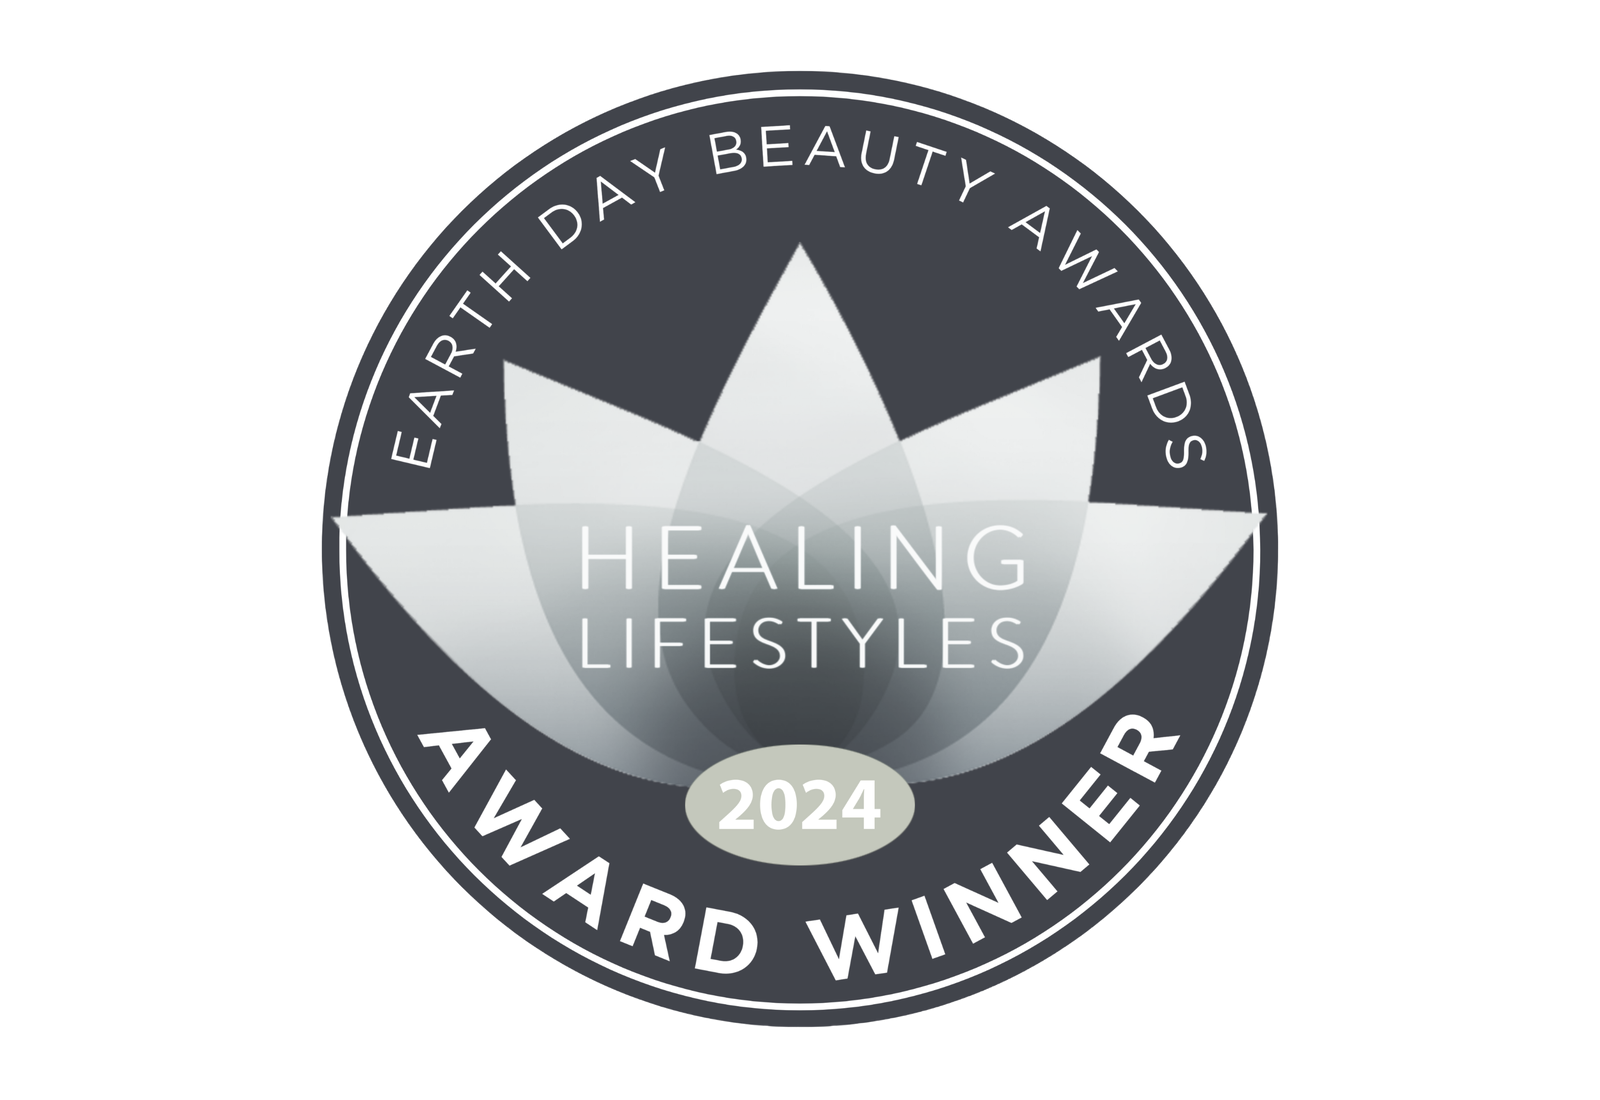 Healing Lifestyles Earth Day Beauty Awards 2024